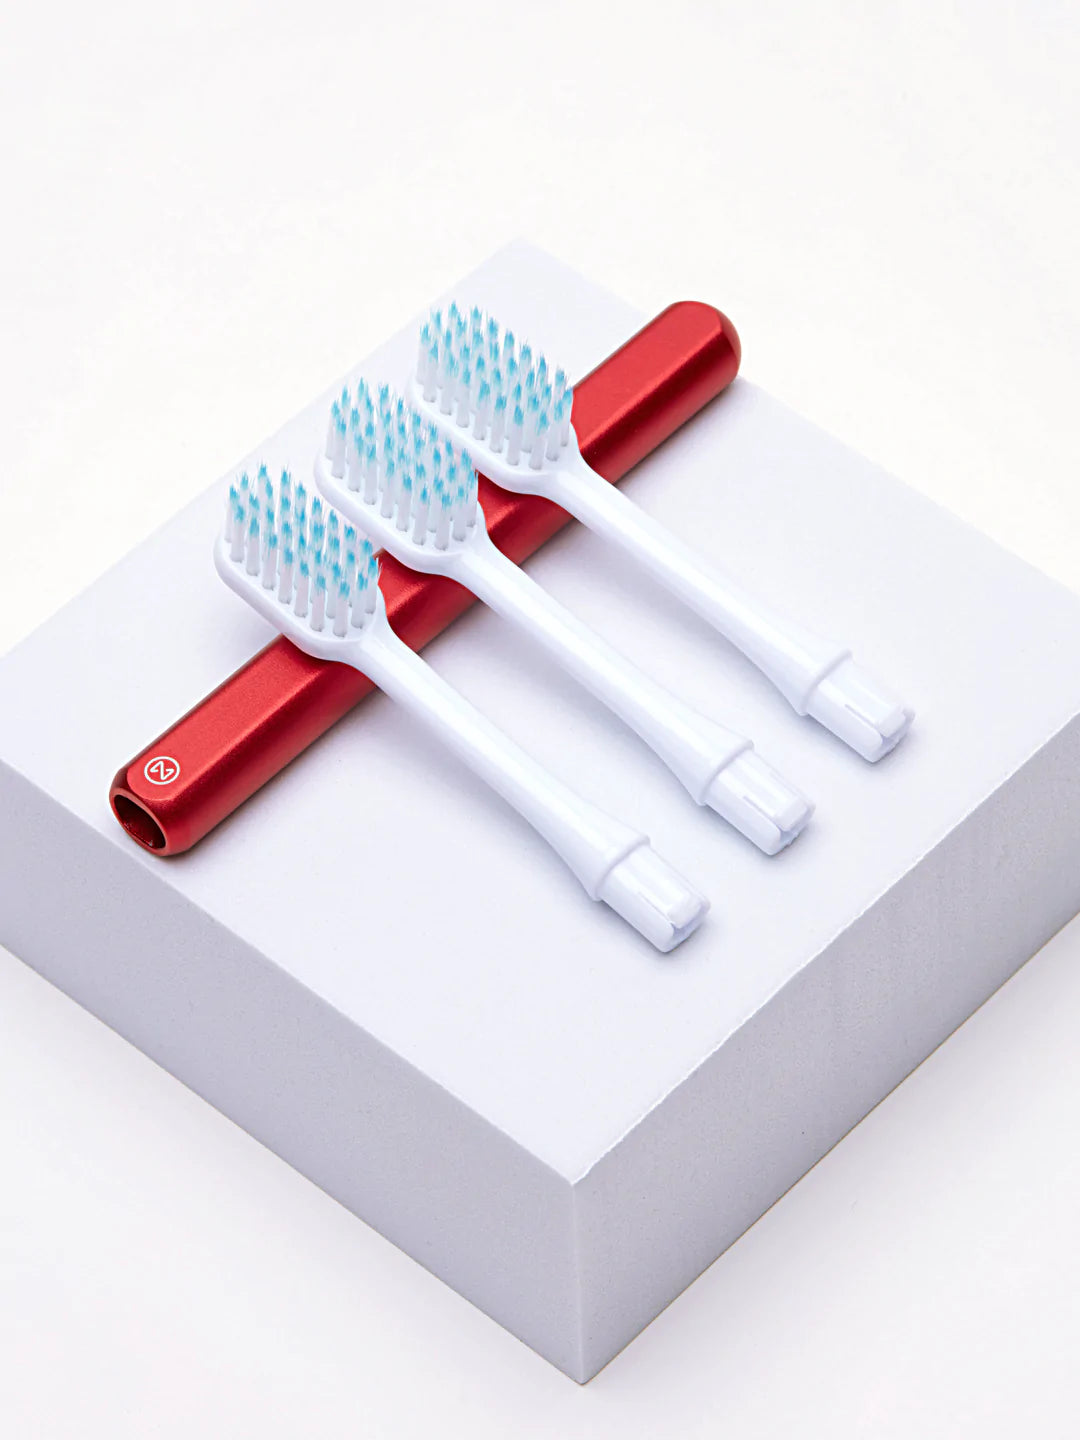 Deep Dive: Why Soft Toothbrush Bristles Are the Best Choice